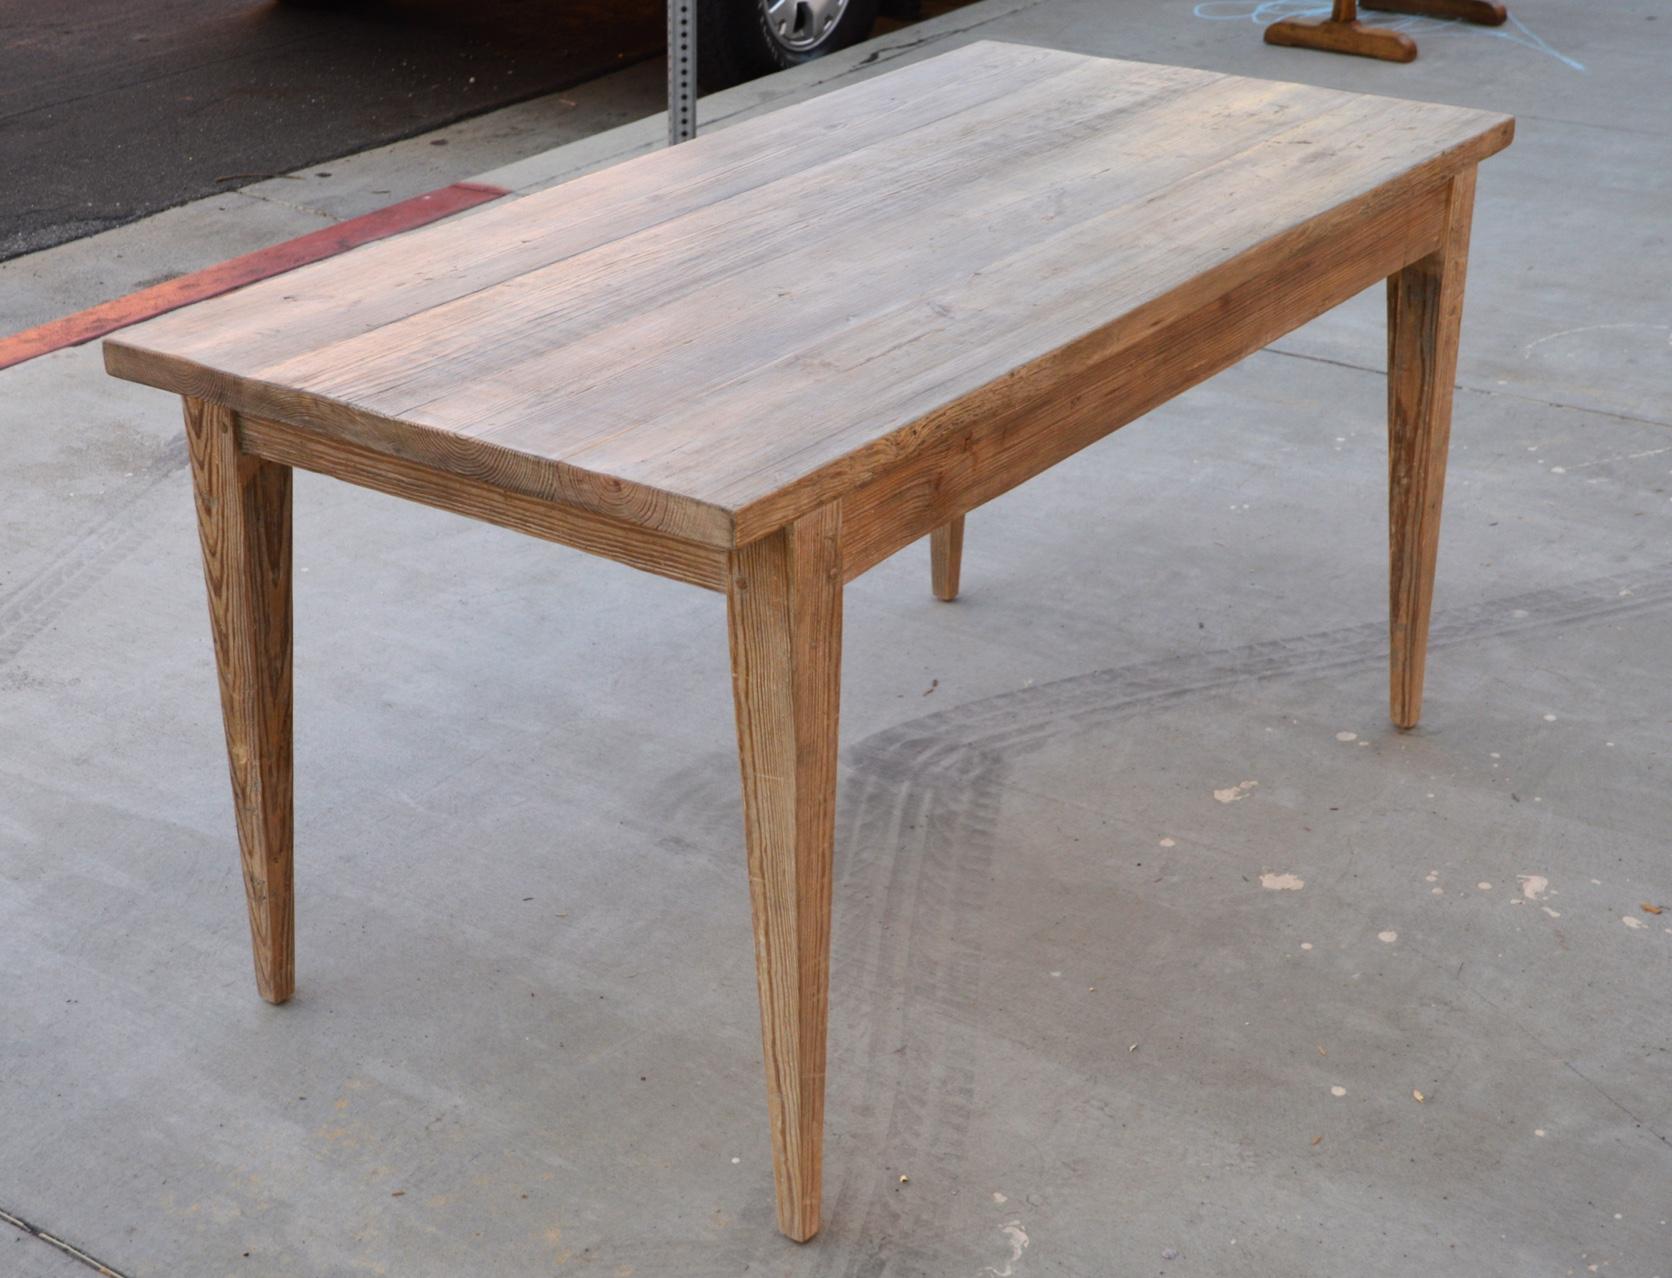 Contemporary Harvest Table Made from Reclaimed Pine